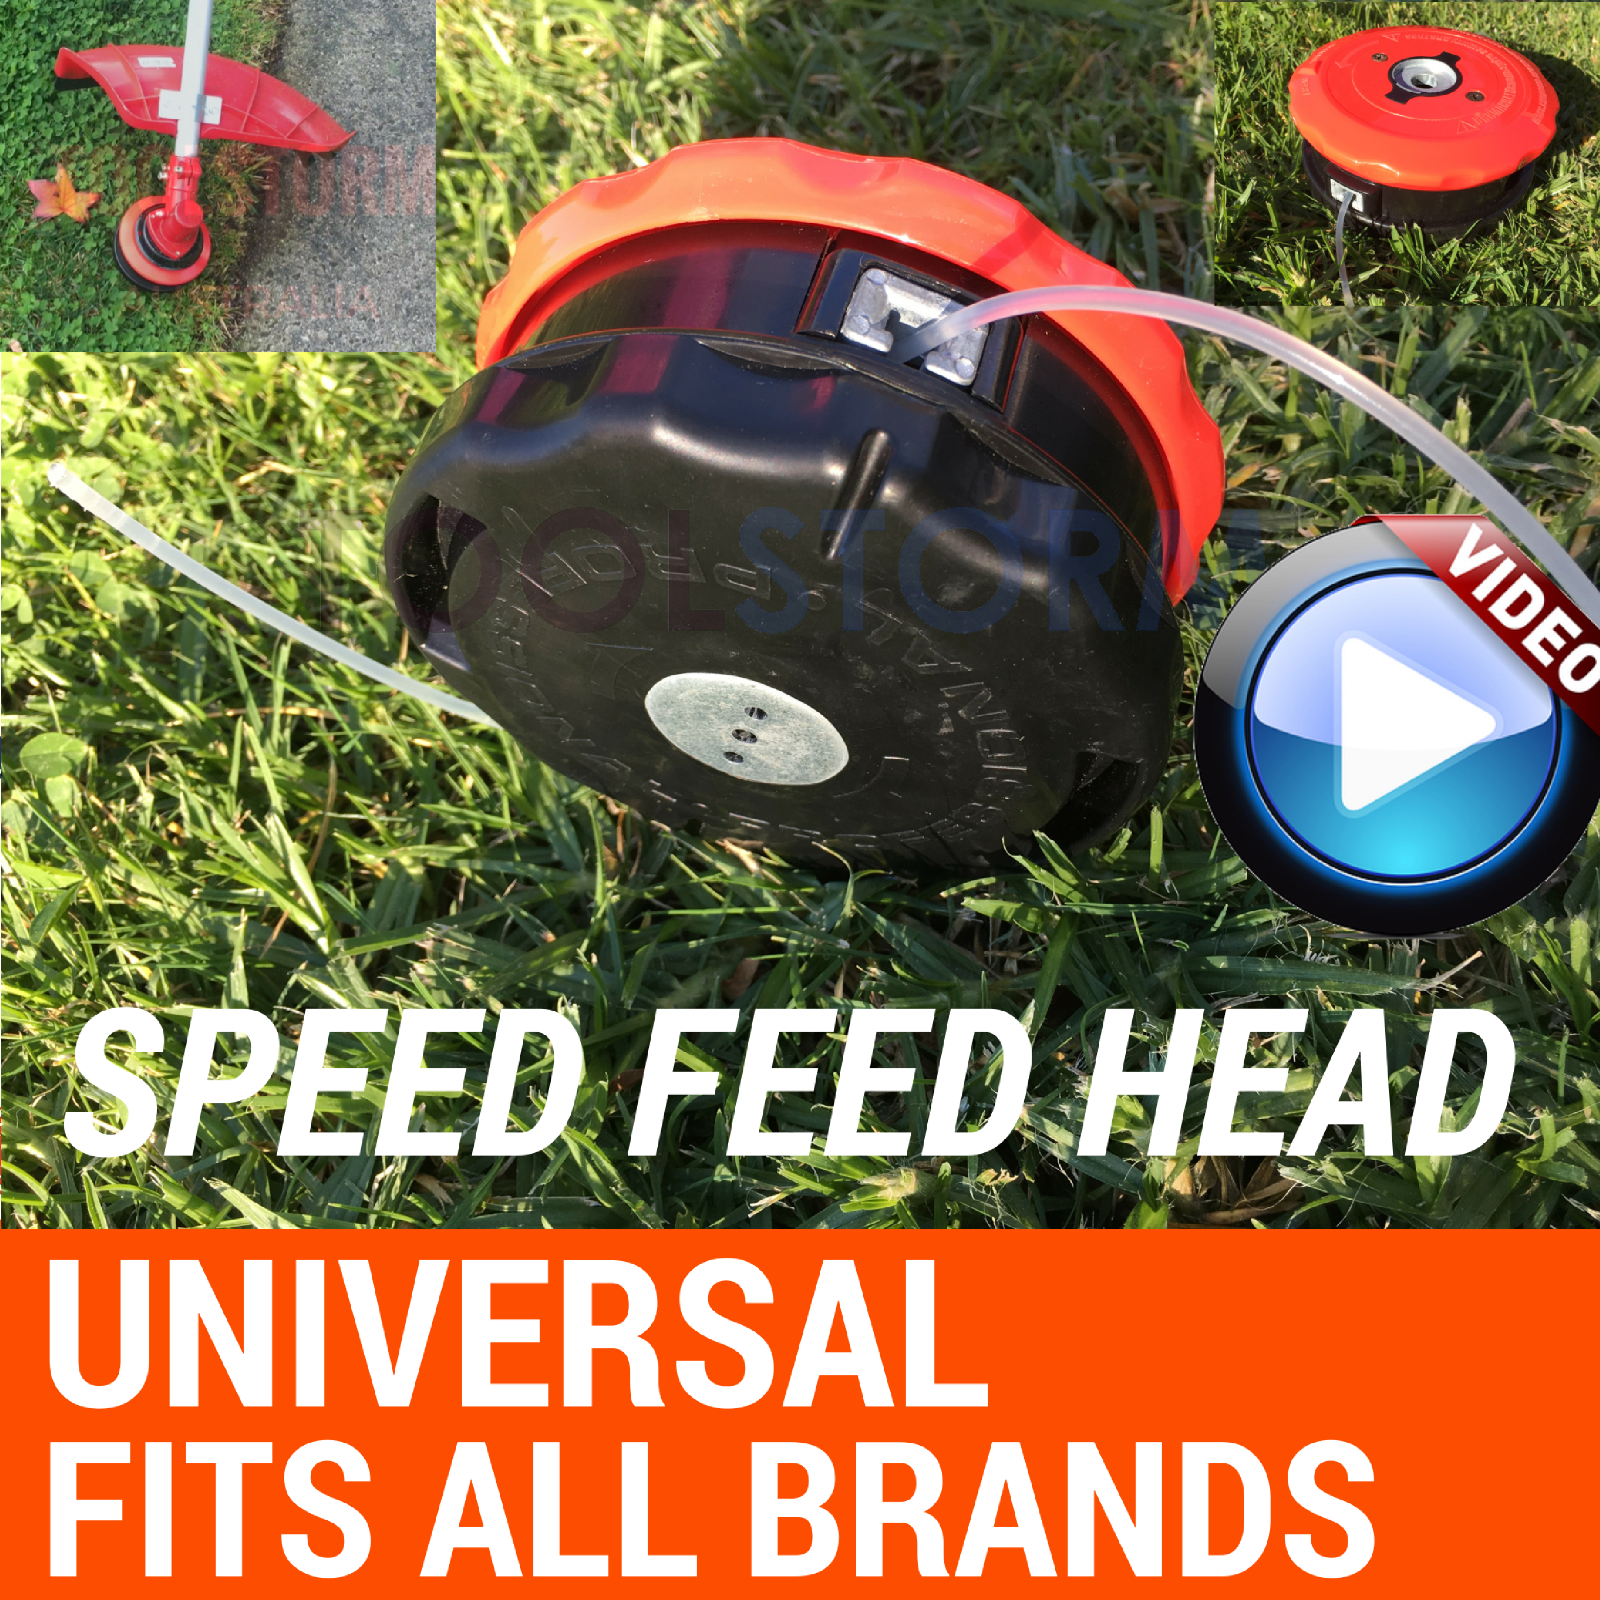 UNIVERSAL FAST TWISTER BUMP FEED LINE TRIMMER HEAD,WHIPPER SNIPPER,BRUSH CUTTER